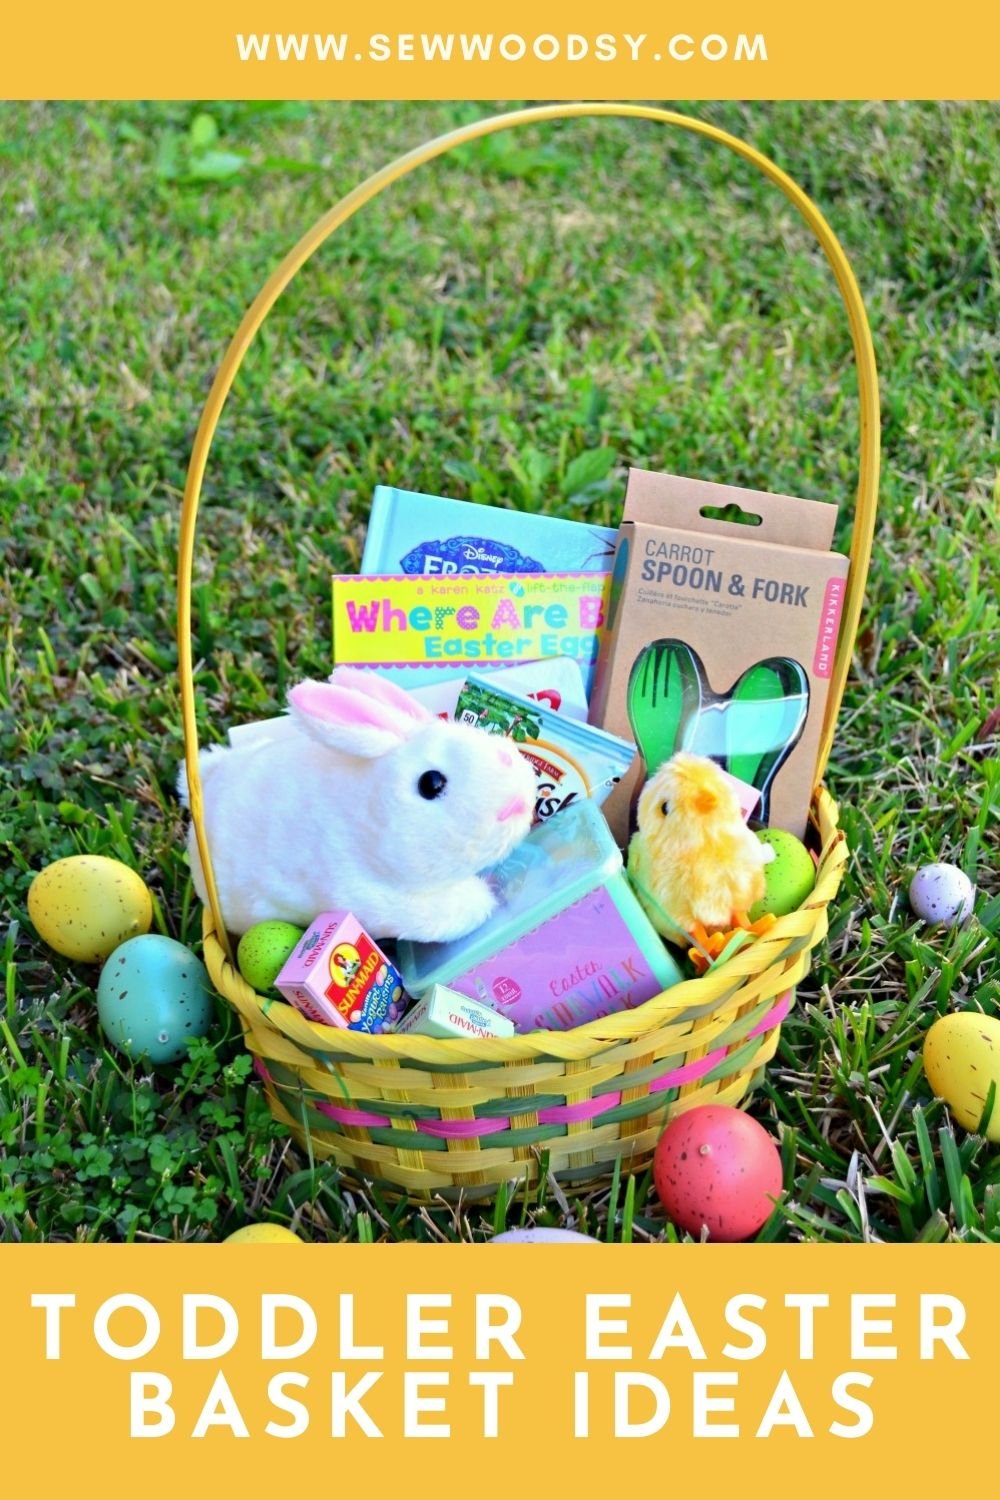 Yellow basket filled with toys on grass with text on image for Pinterest.